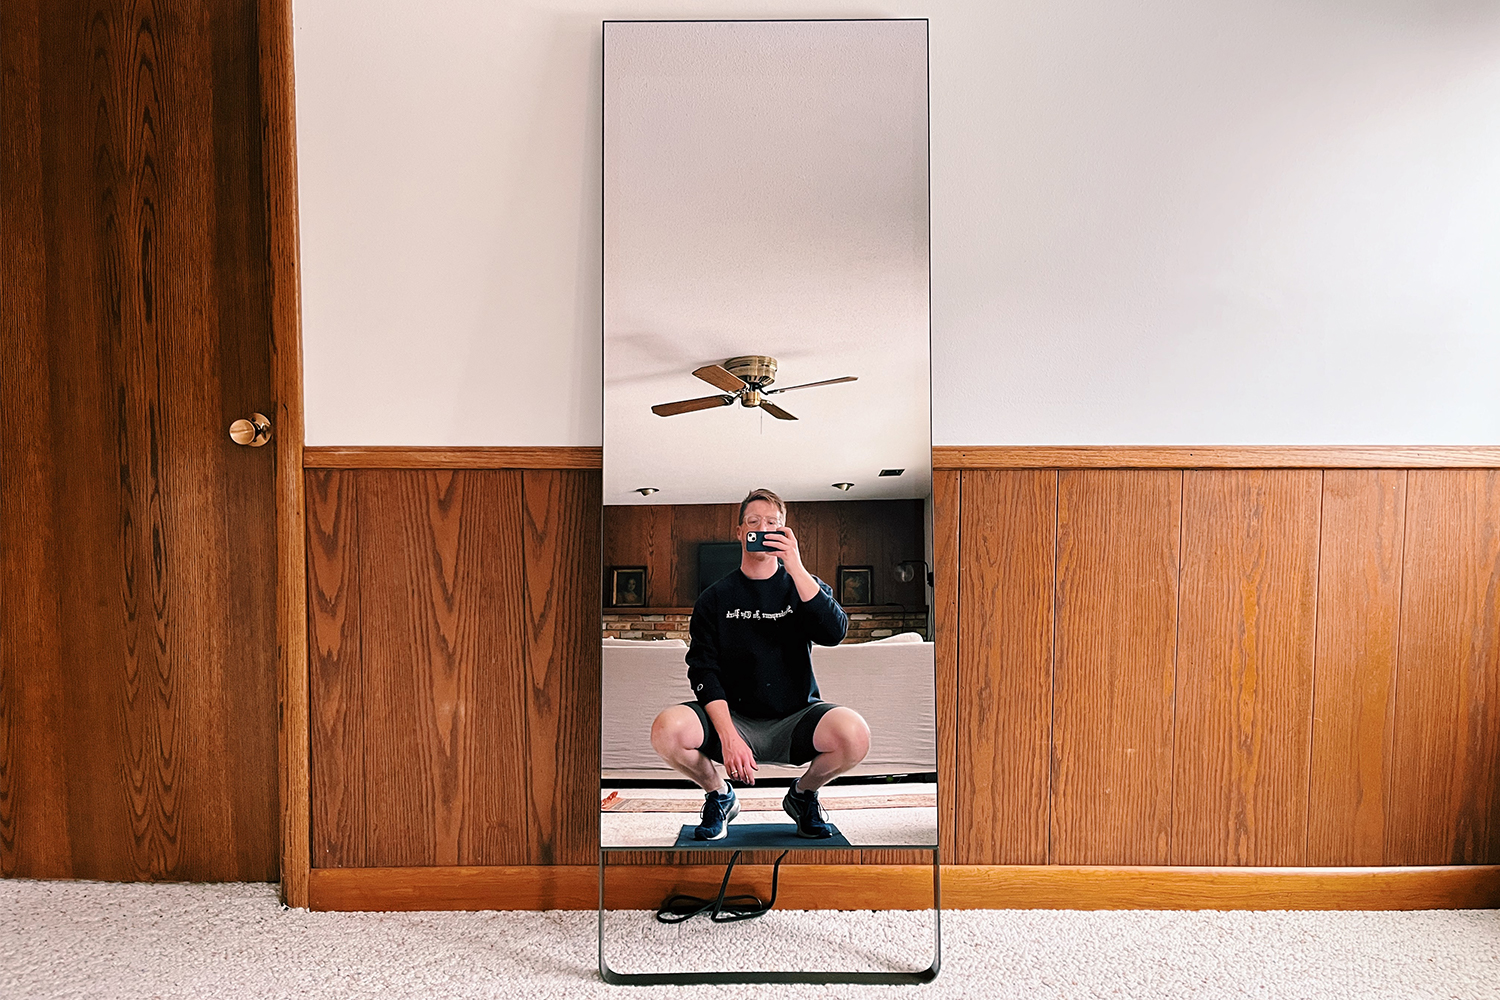 The original exercise mirror, from Mirror, leaning up against a wall at home. We reviewed the home fitness machine to find the pros and cons.